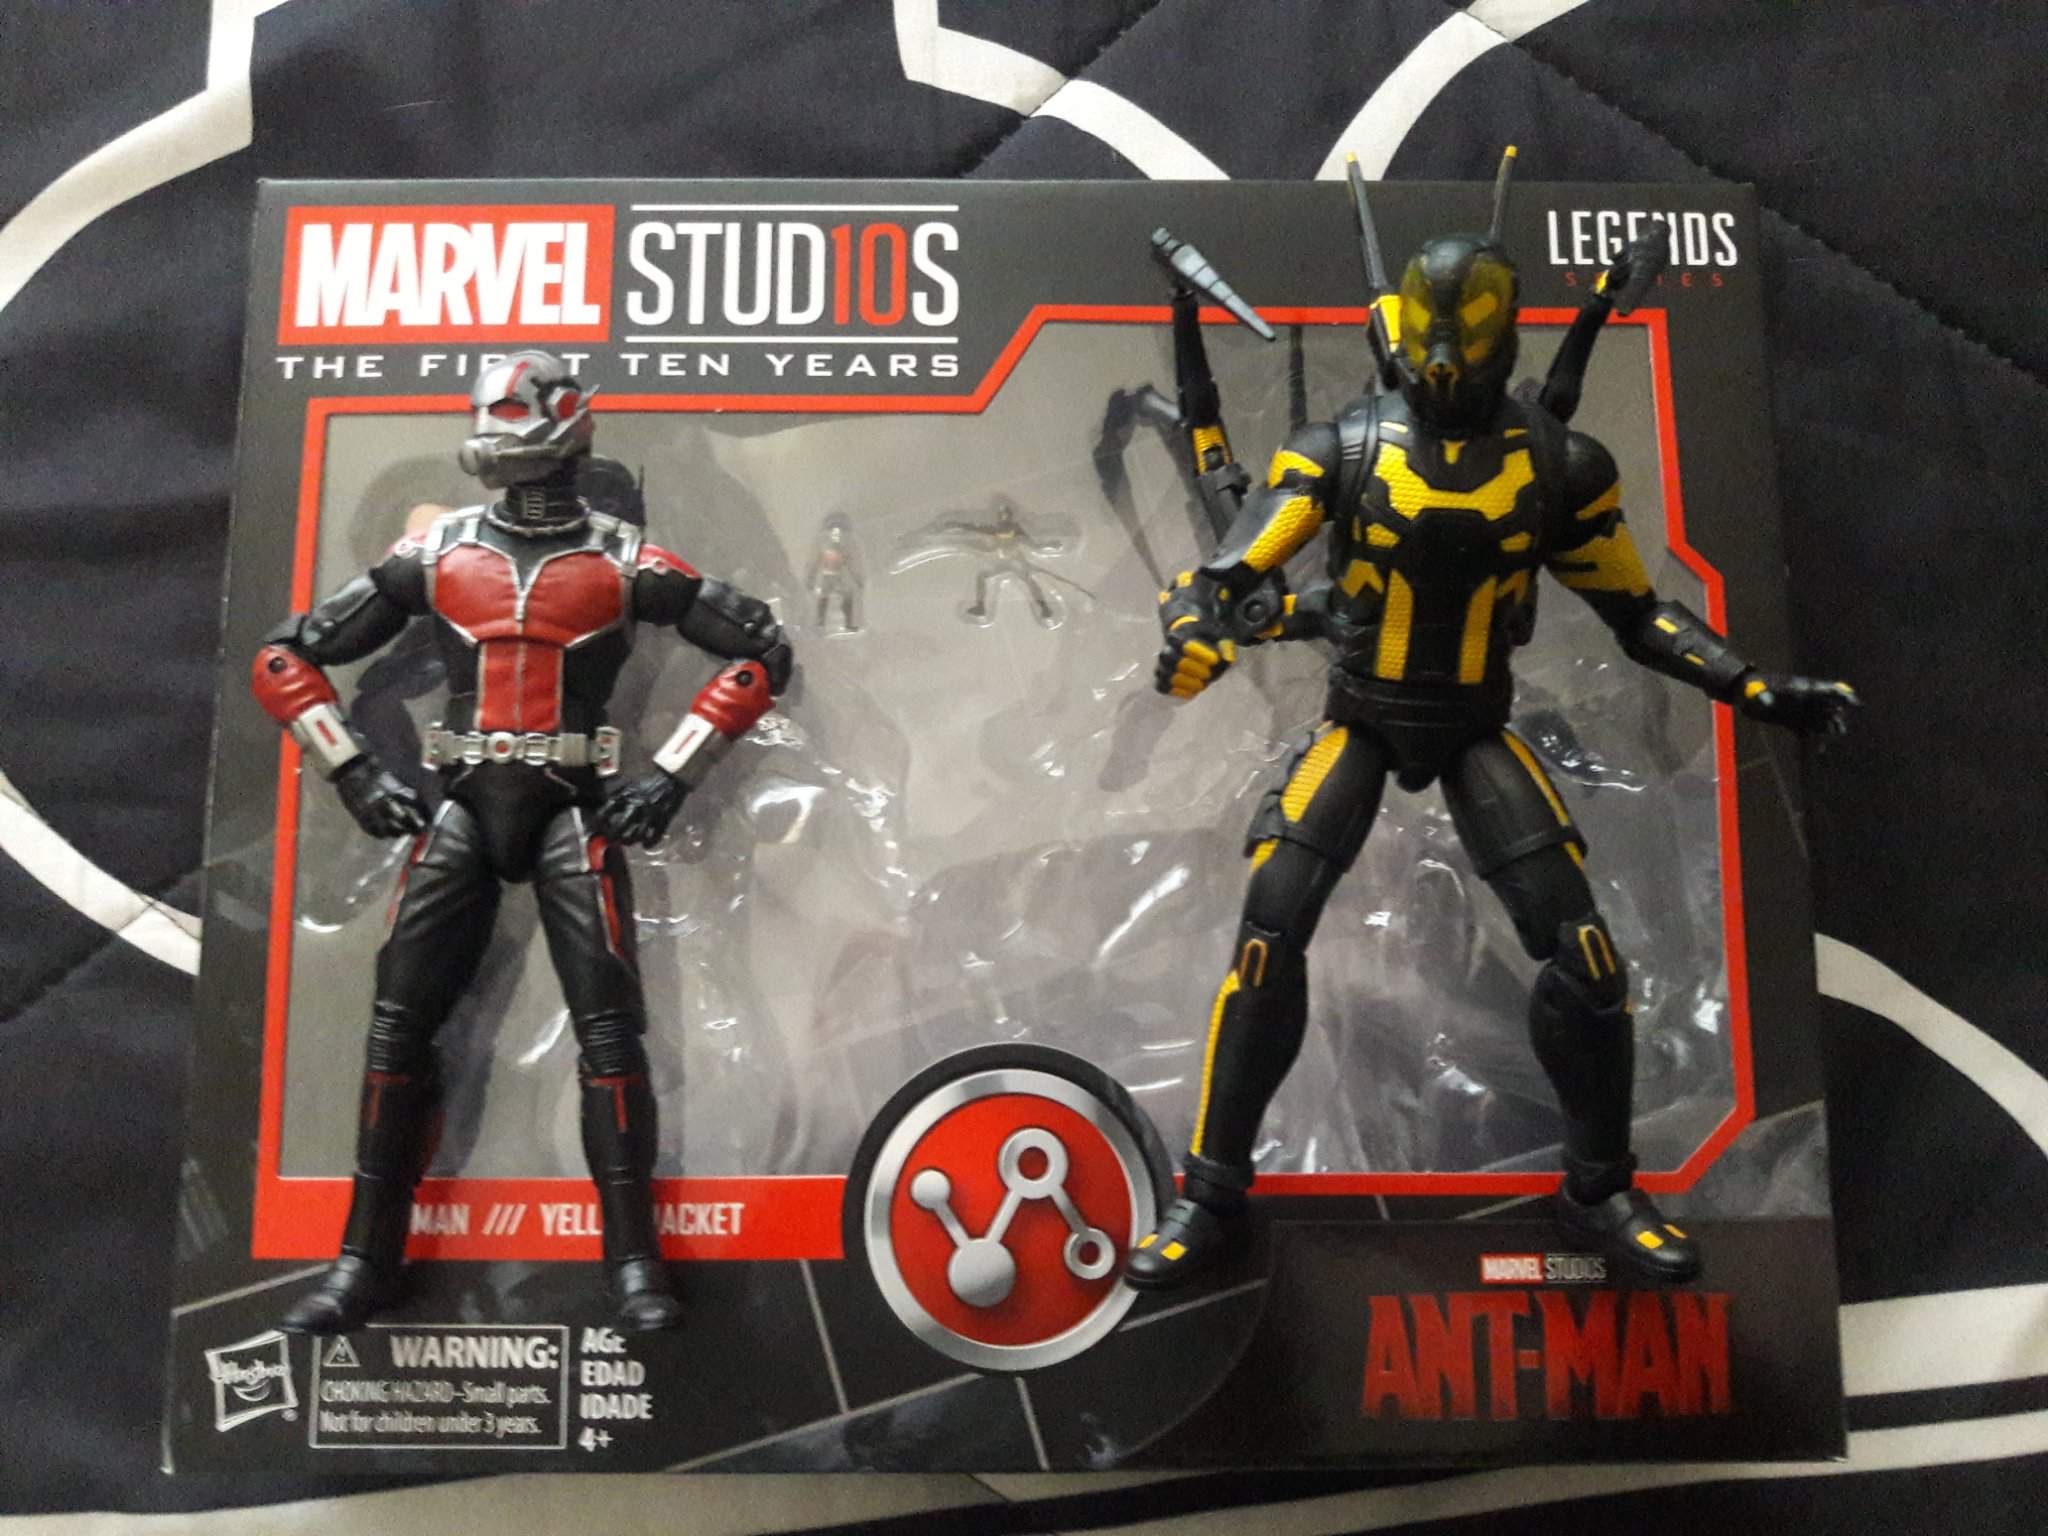 marvel legends ant man and yellowjacket